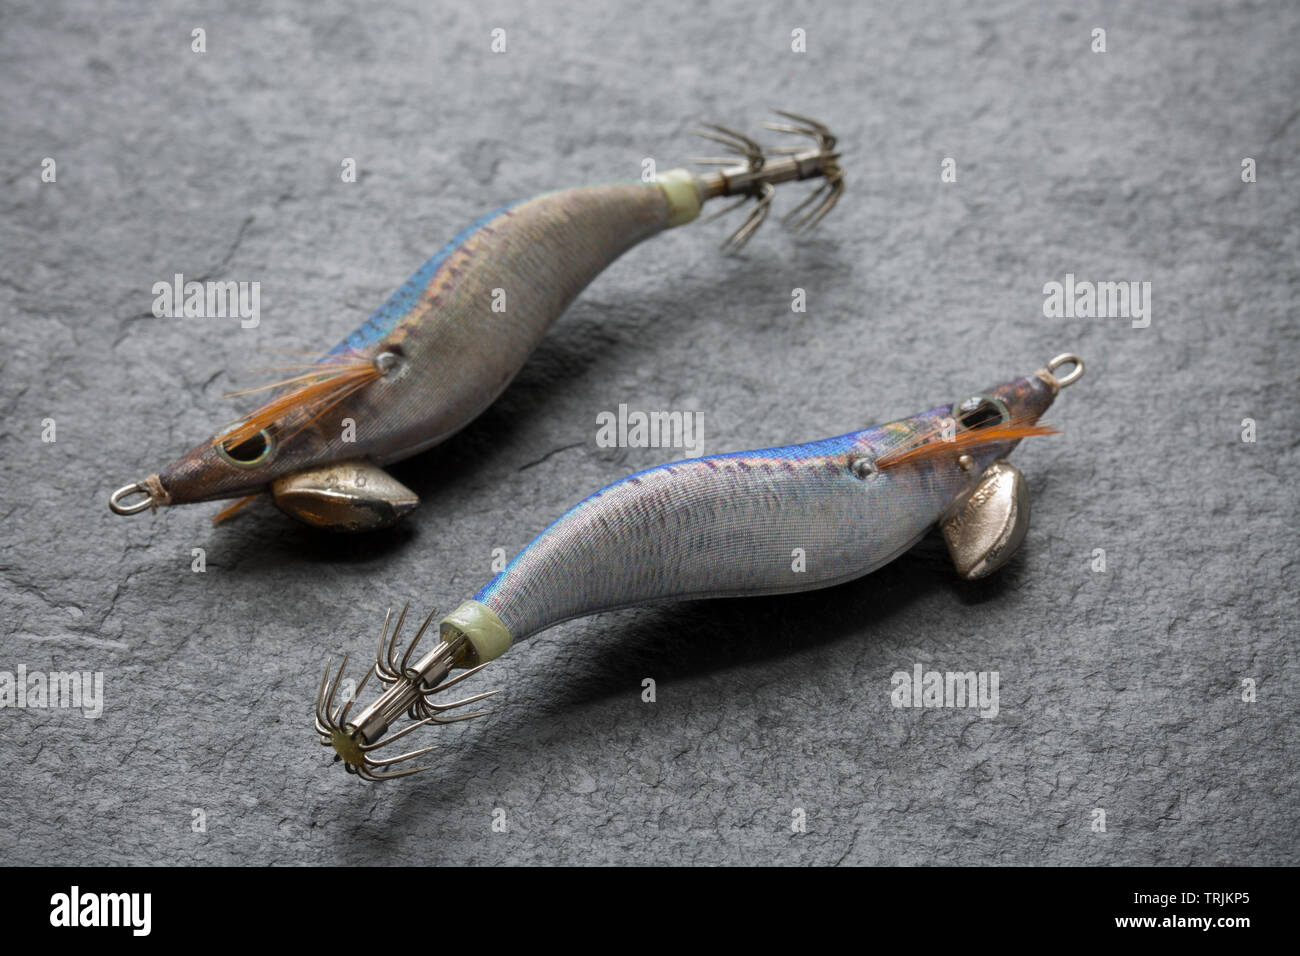 Two Yamashita squid jigs, or lures. Squid fishing has become popular in the UK both for commercial fishermen as well as recreational anglers. The lure Stock Photo